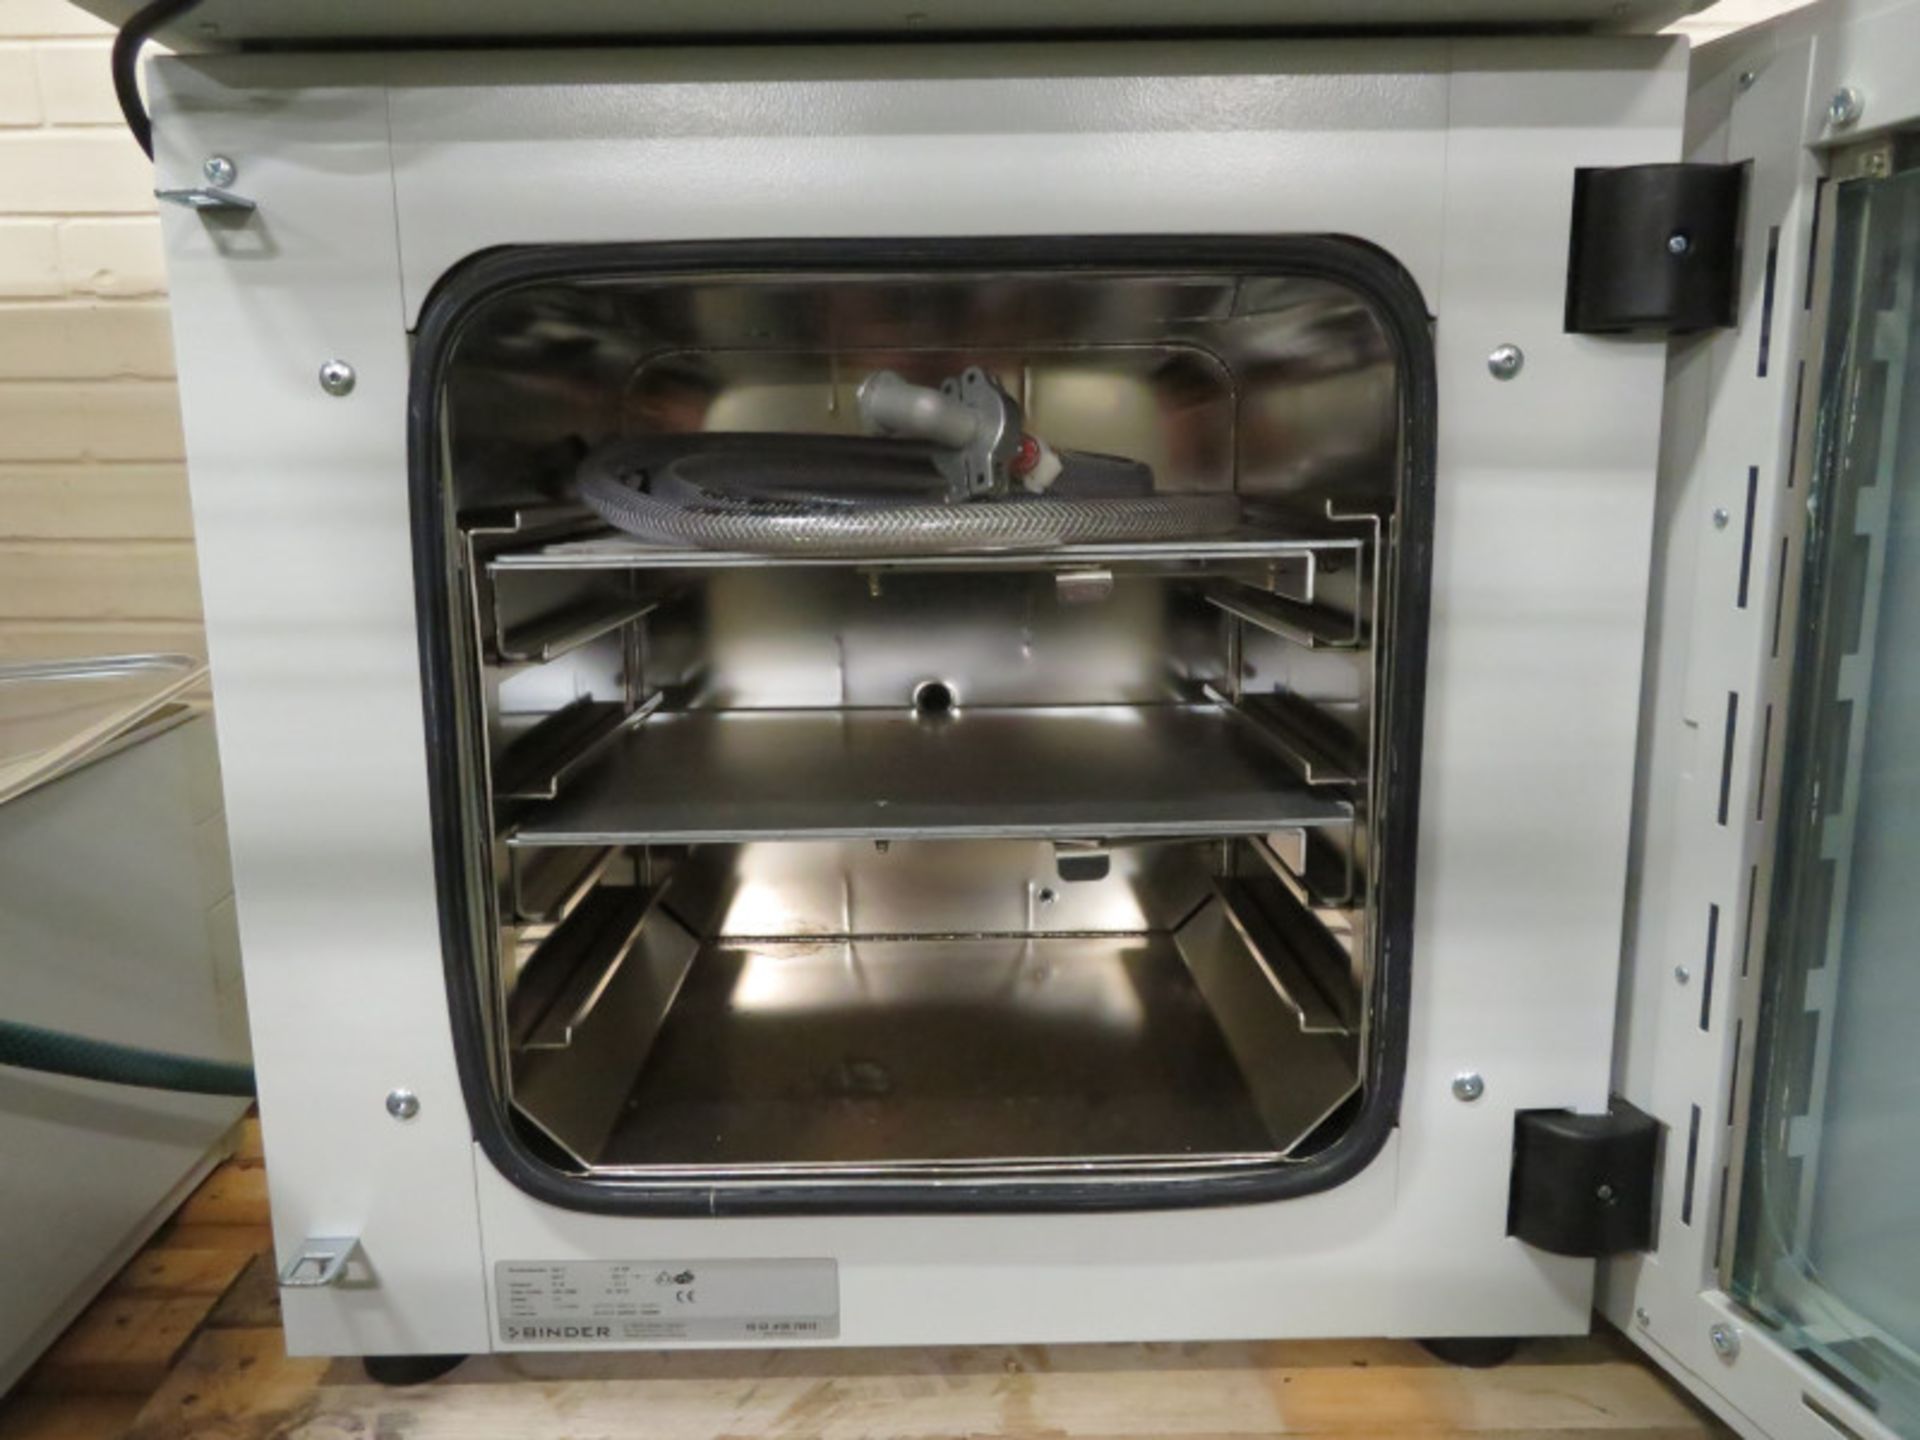 Binder Lab Oven L640 x W600 x H750mm - Image 3 of 5